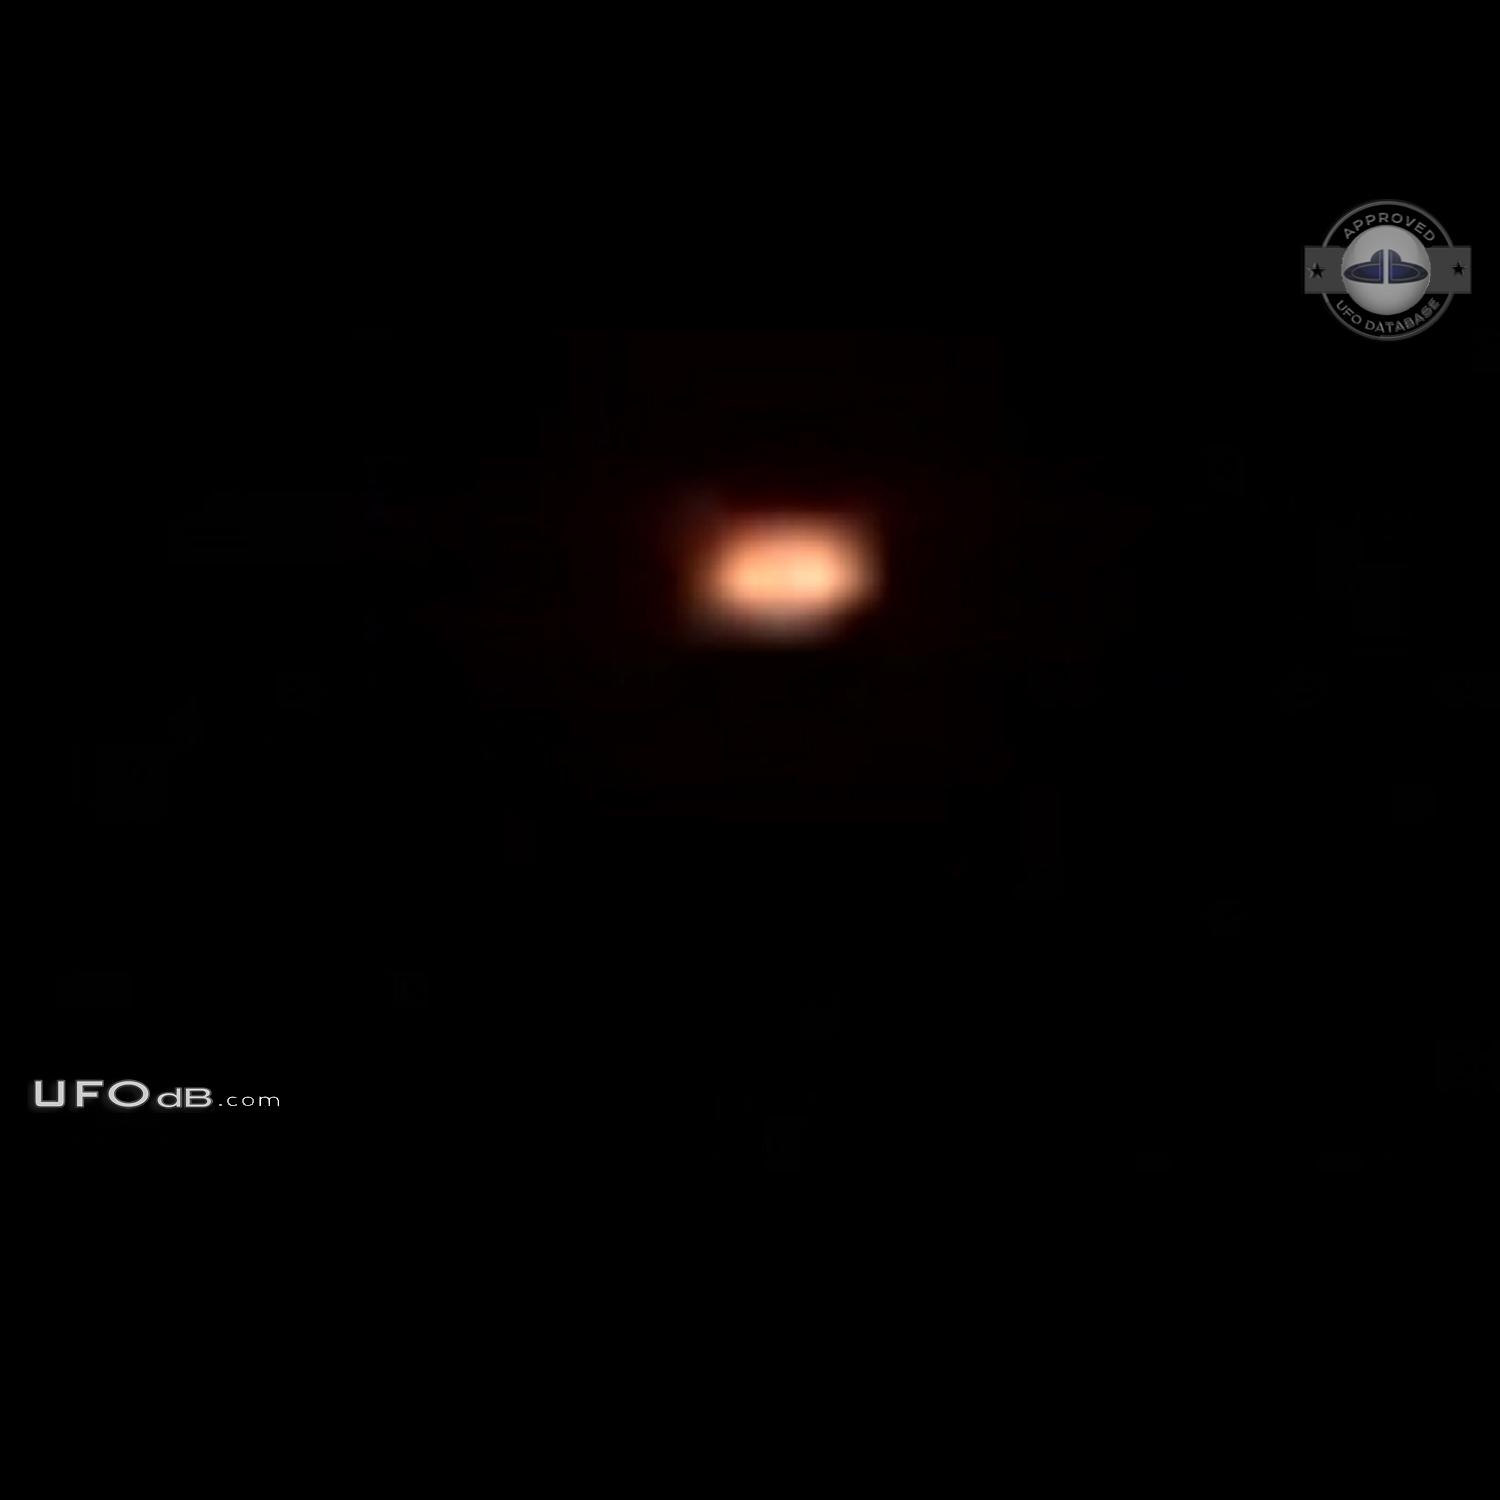 Glowing amber colored moving UFO - Kolkata, West Bengal India 2014 UFO Picture #691-1